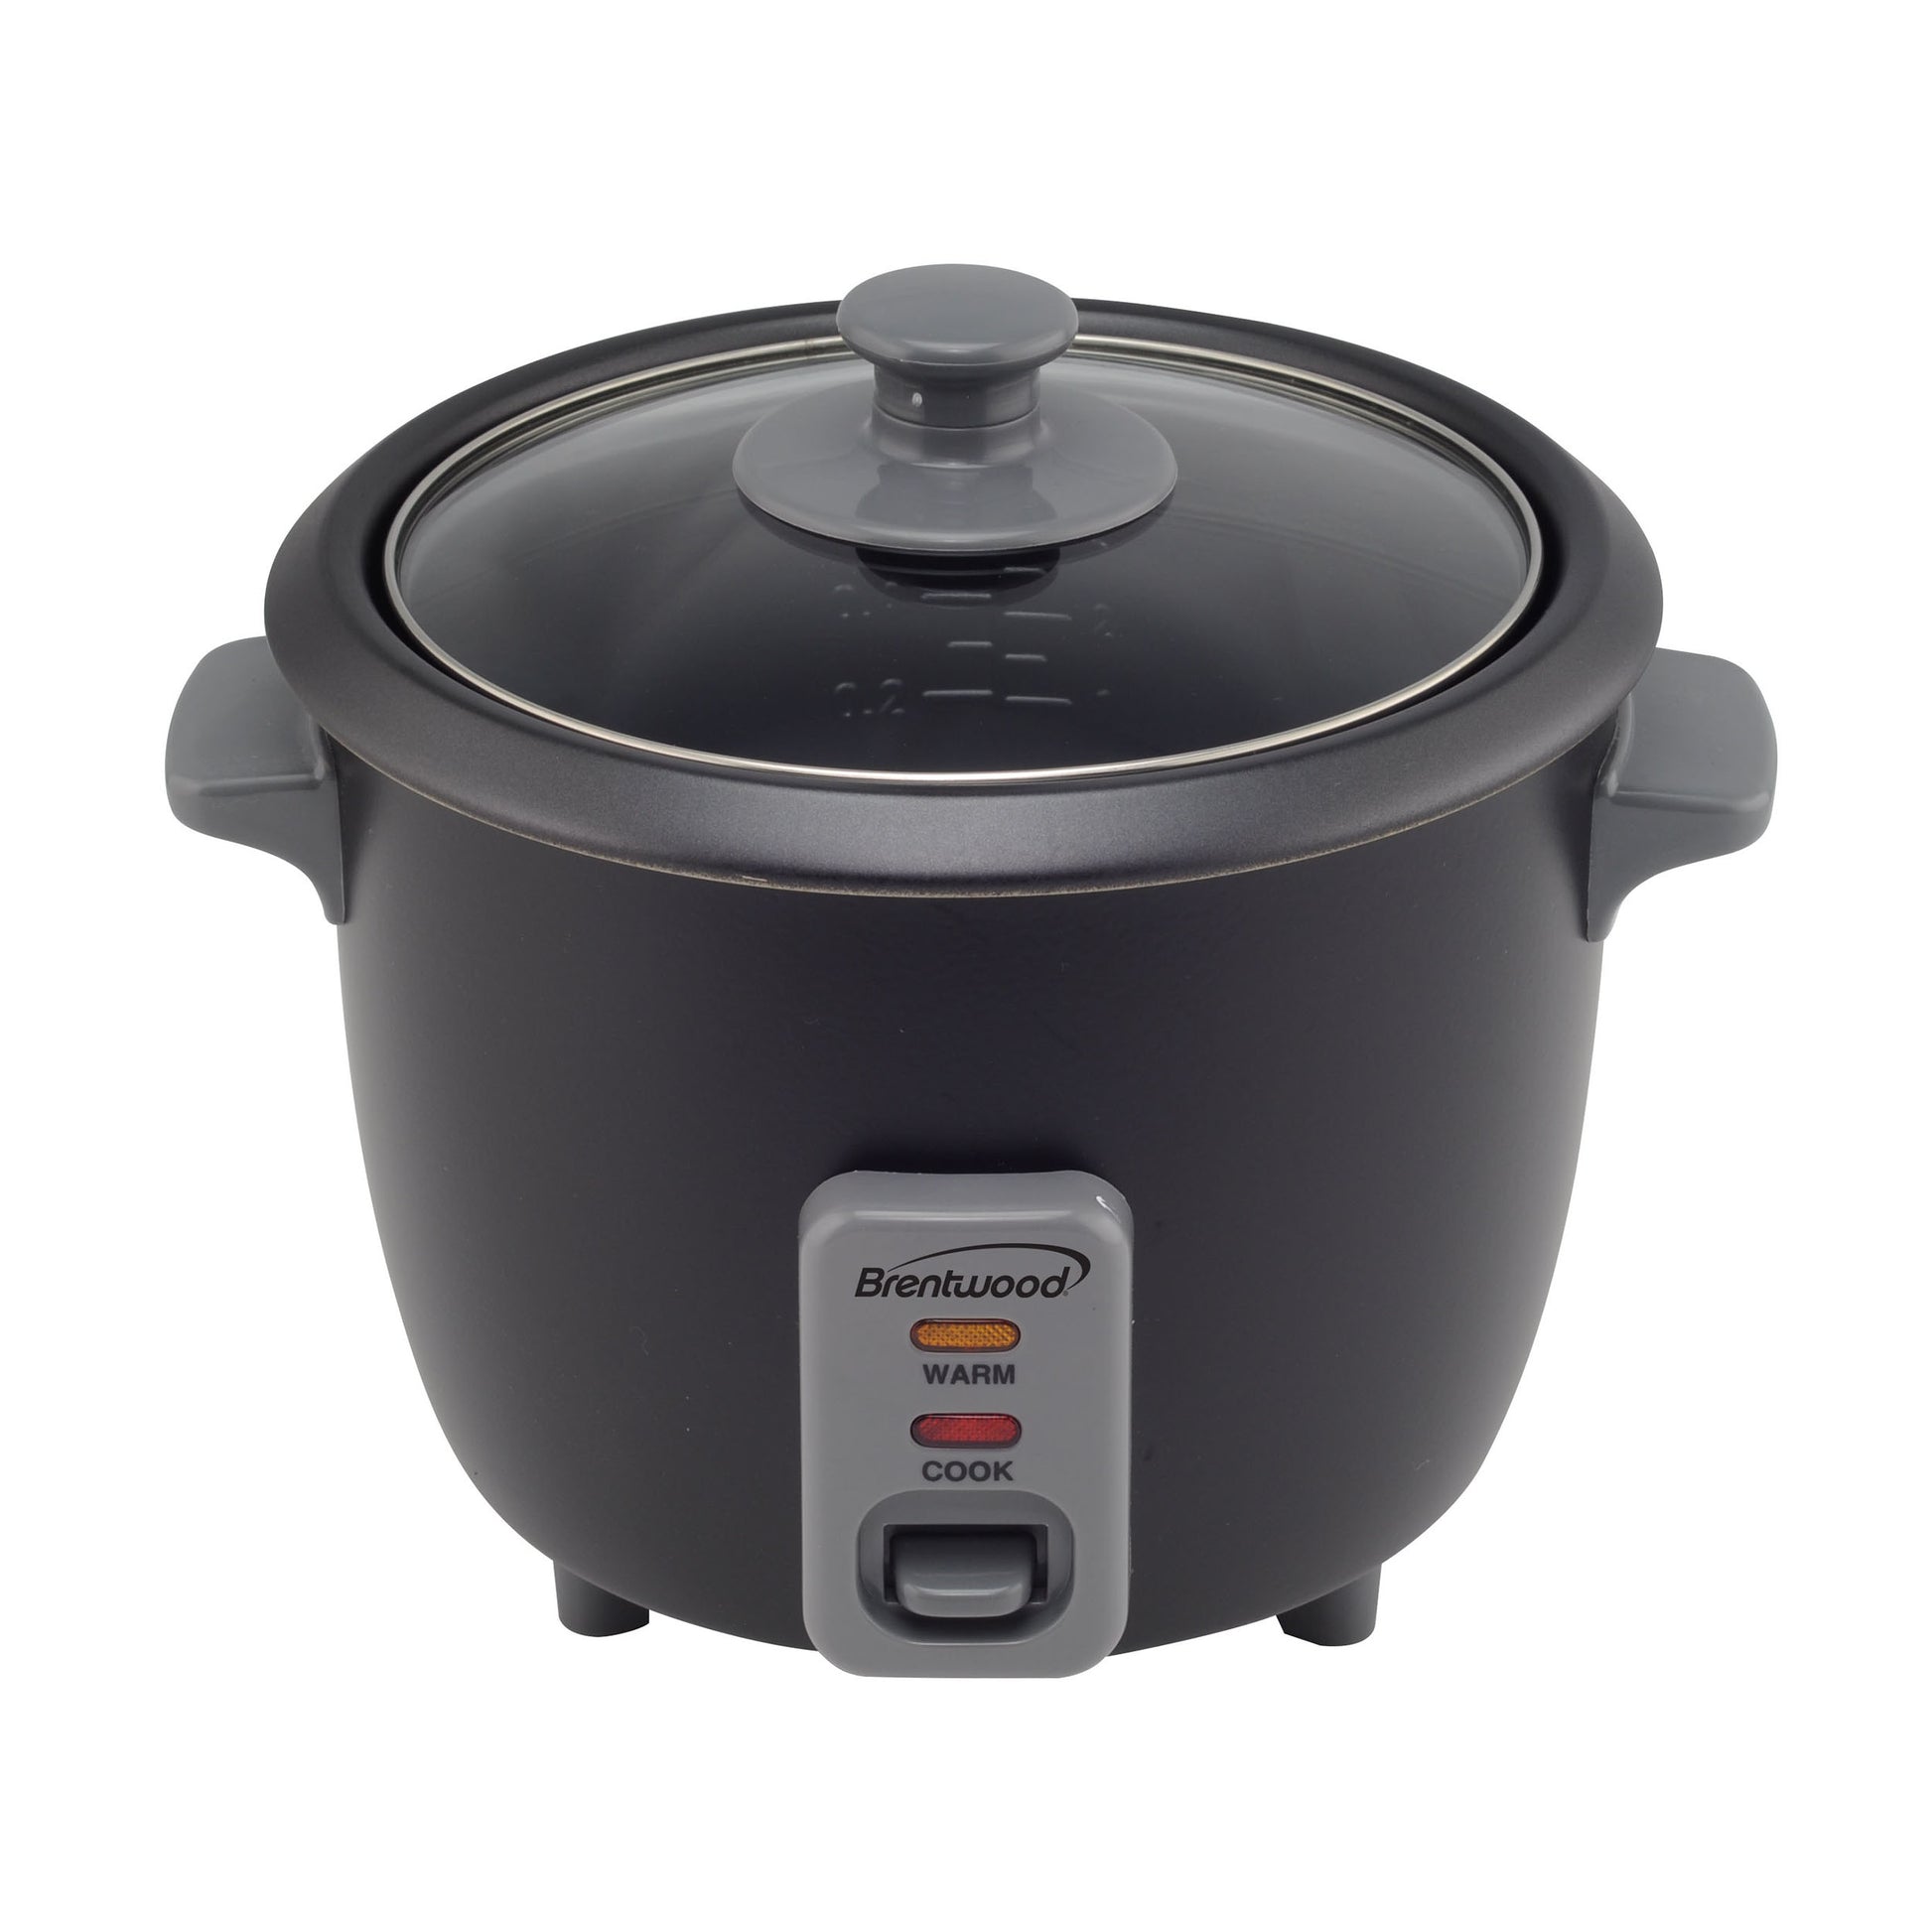 Brentwood Brentwood 4 Cup Rice Cooker in Black